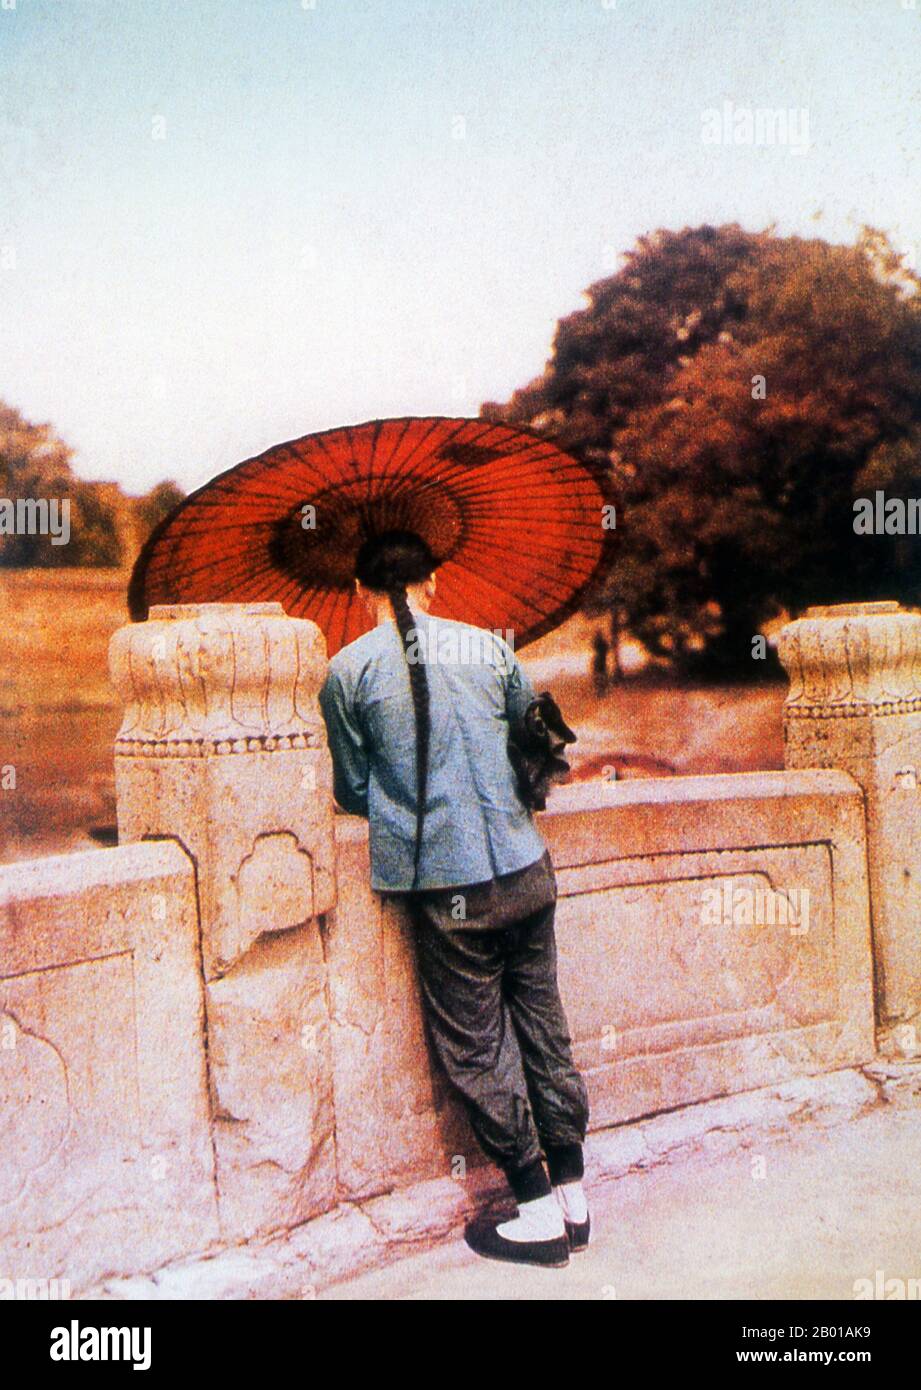 China: A Chinese man with an umbrella and long queue, c. 1900.  The queue (Chinese: Biànzi) was a male hairstyle worn by the Manchus from central Manchuria and later imposed on the Han Chinese during the Qing dynasty. The hairstyle consisted of the hair on the front of the head being shaved off above the temples every ten days and the rest of the hair braided into a long ponytail.  The hairstyle was compulsory for all males and the penalty for not having it was execution as it was considered treason. After the fall of the Qing dynasty, the Chinese no longer had to wear the queue. Stock Photo